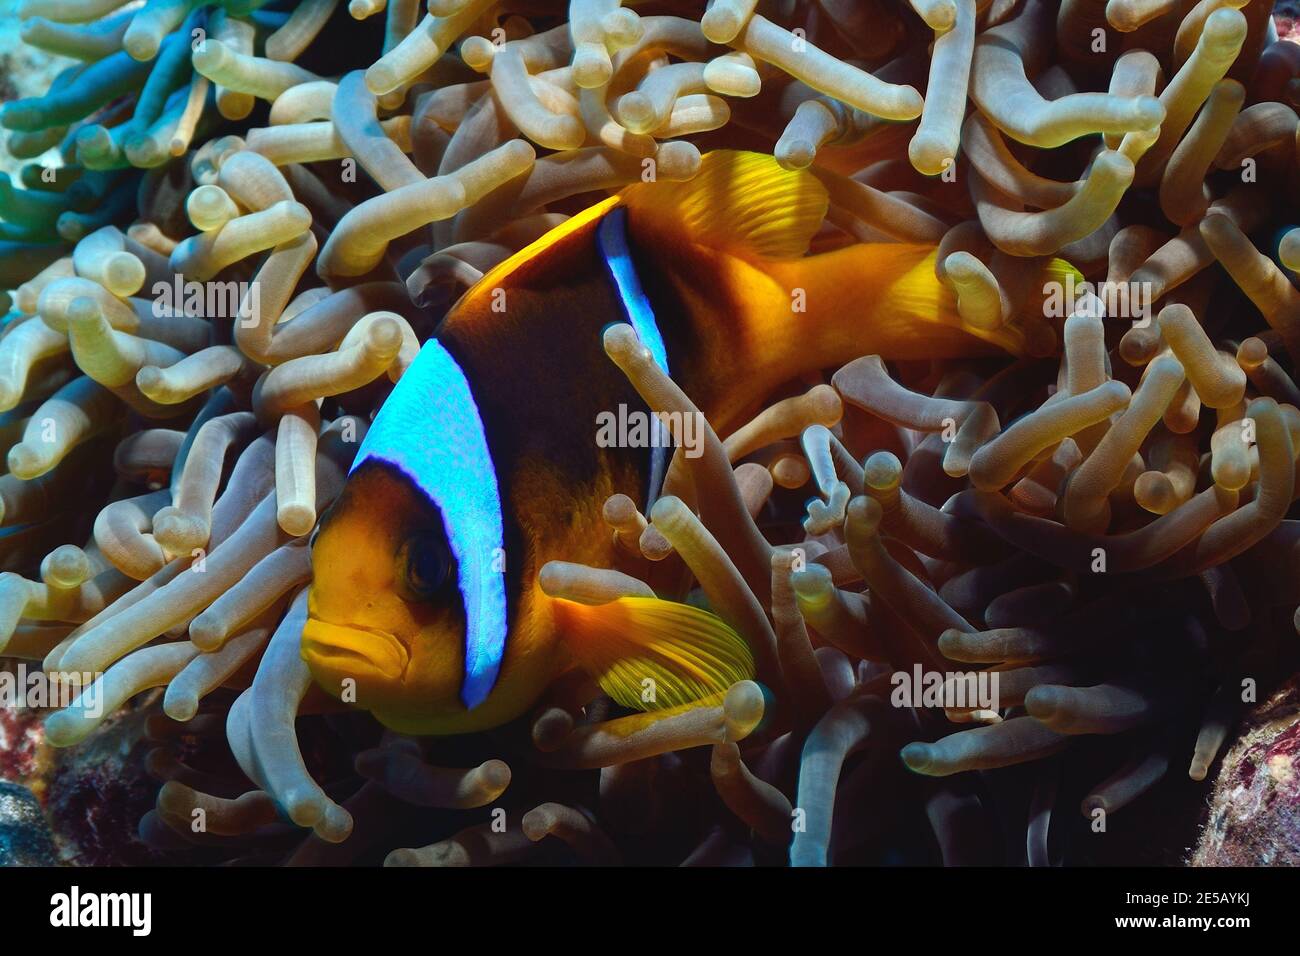 Amphiprion bicinctus, red sea anemonefish, red sea clownfish, Rotmeer-Anemonenfisch, Coraya Beach, Rotes Meer, Ägypten, Red Sea, Egypt Stock Photo